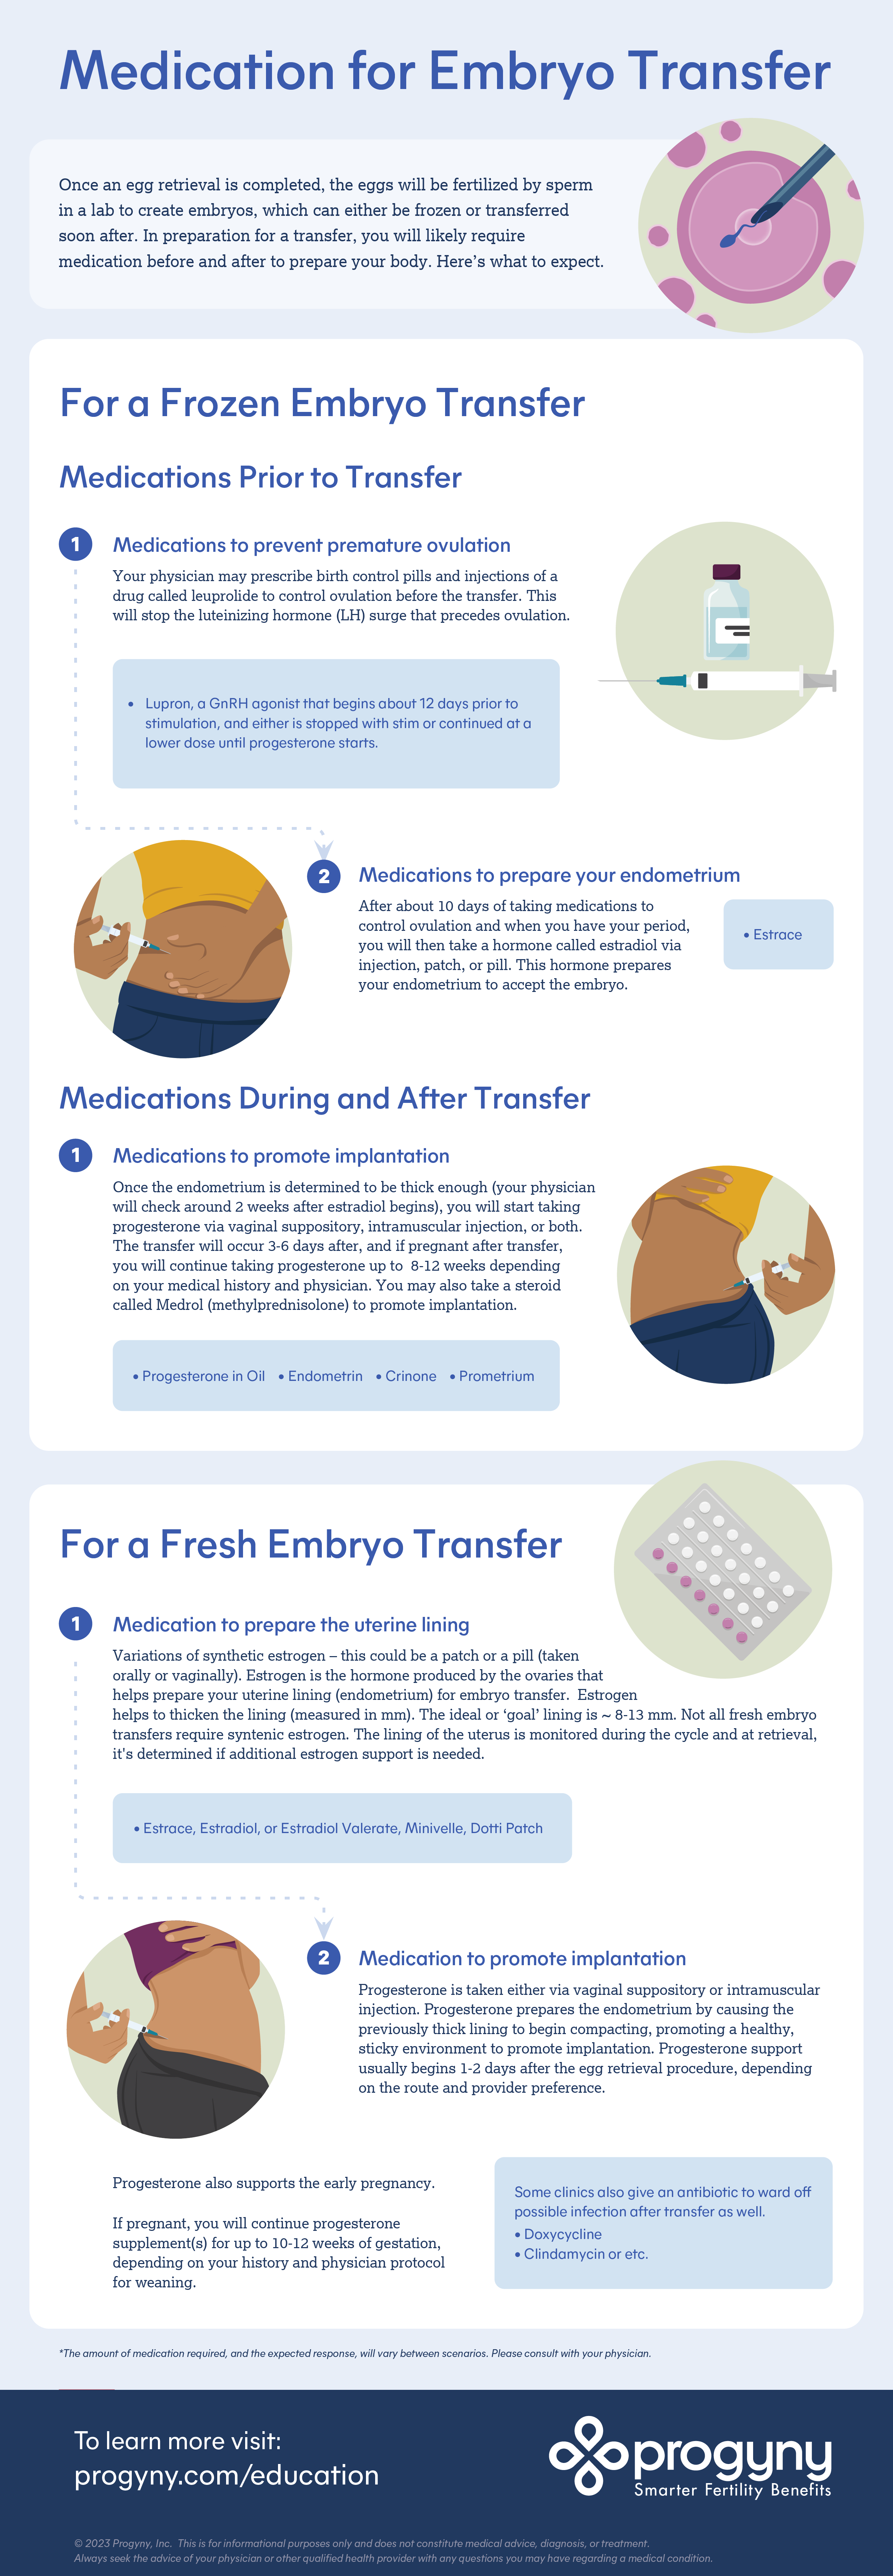 Illustrated infographic showing medications needed prior, during, after a frozen or frozen embryo transfer